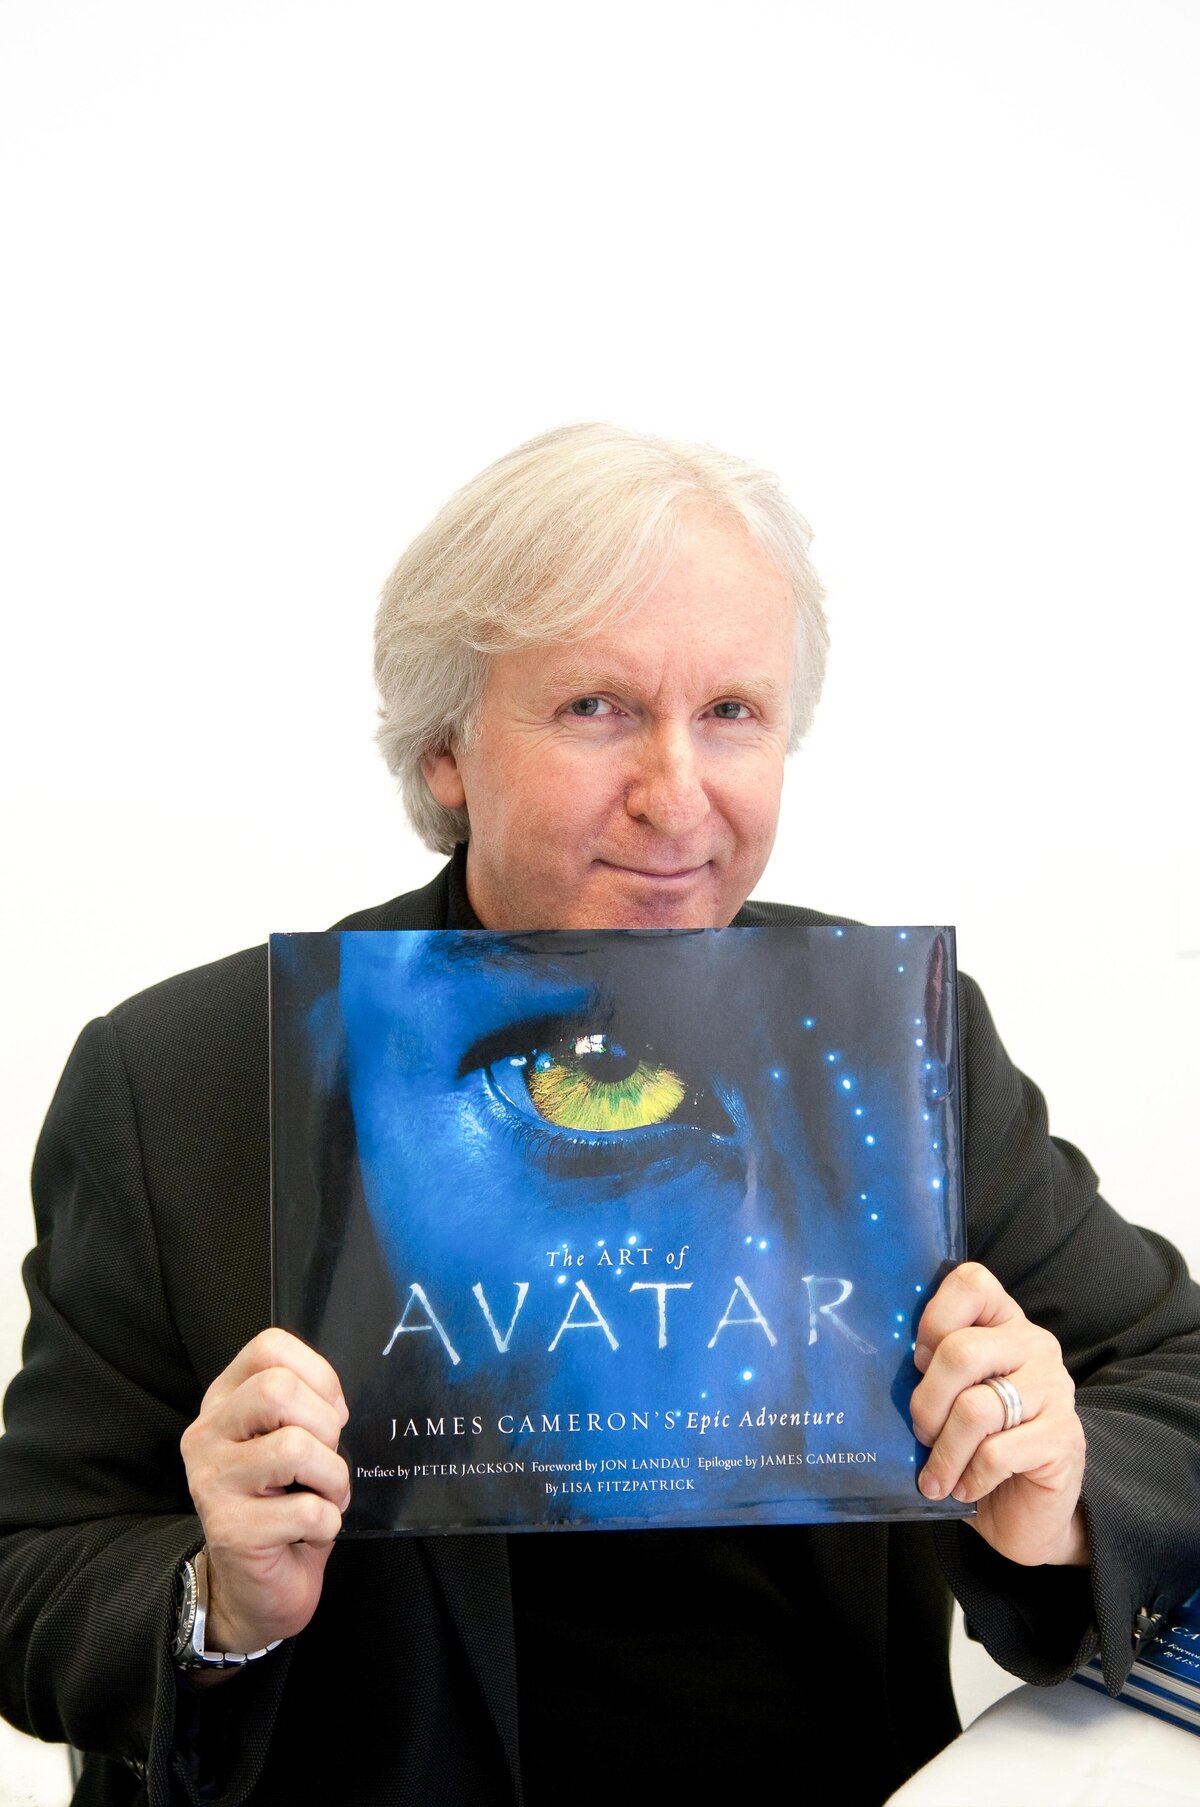 James Cameron  Poses for a portrait holding "The Art of Avatar" Book